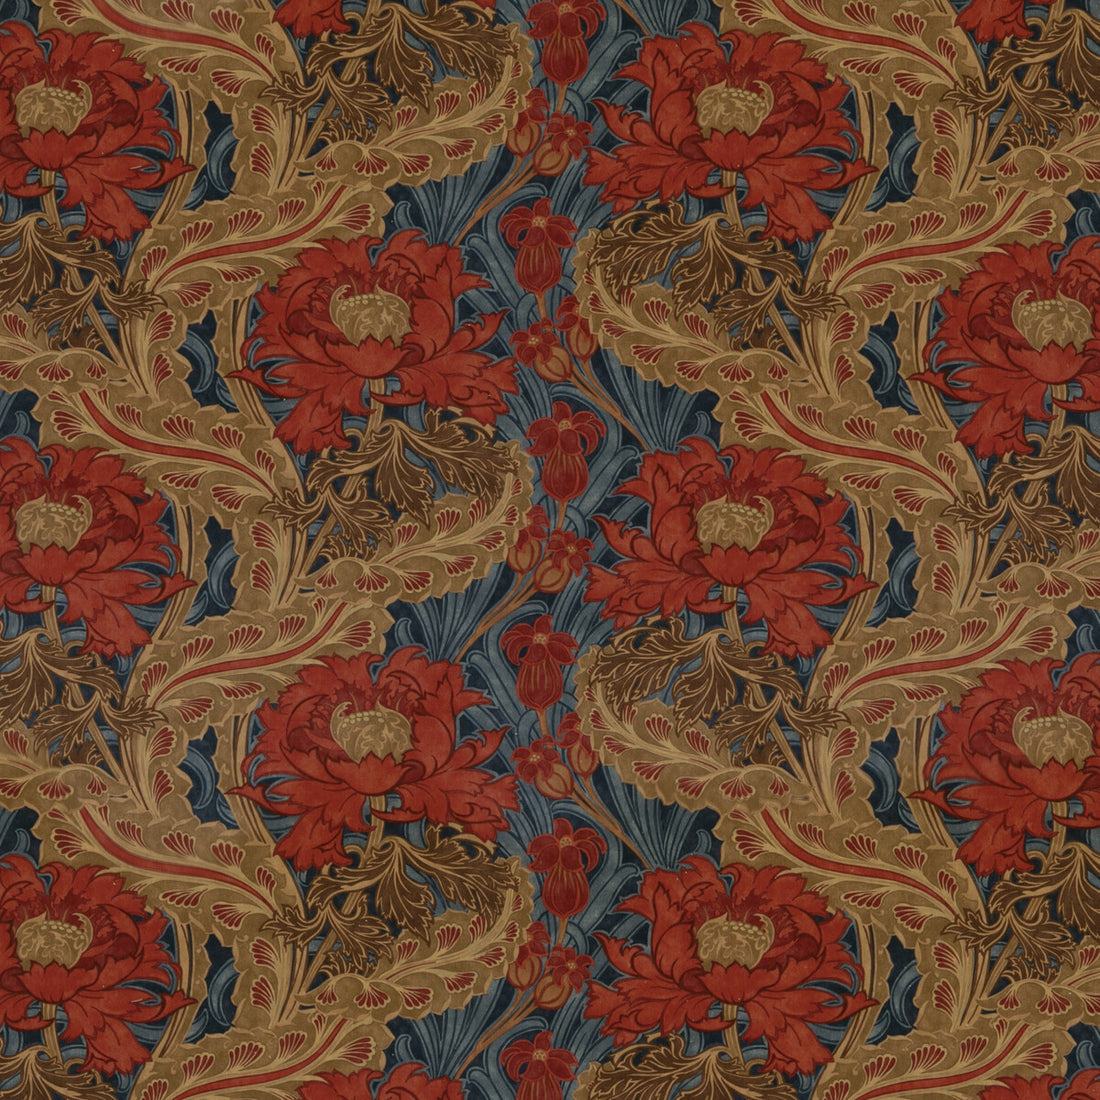 Brantwood Velvet fabric in red/blue color - pattern BP10970.2.0 - by G P &amp; J Baker in the Original Brantwood Fabric collection